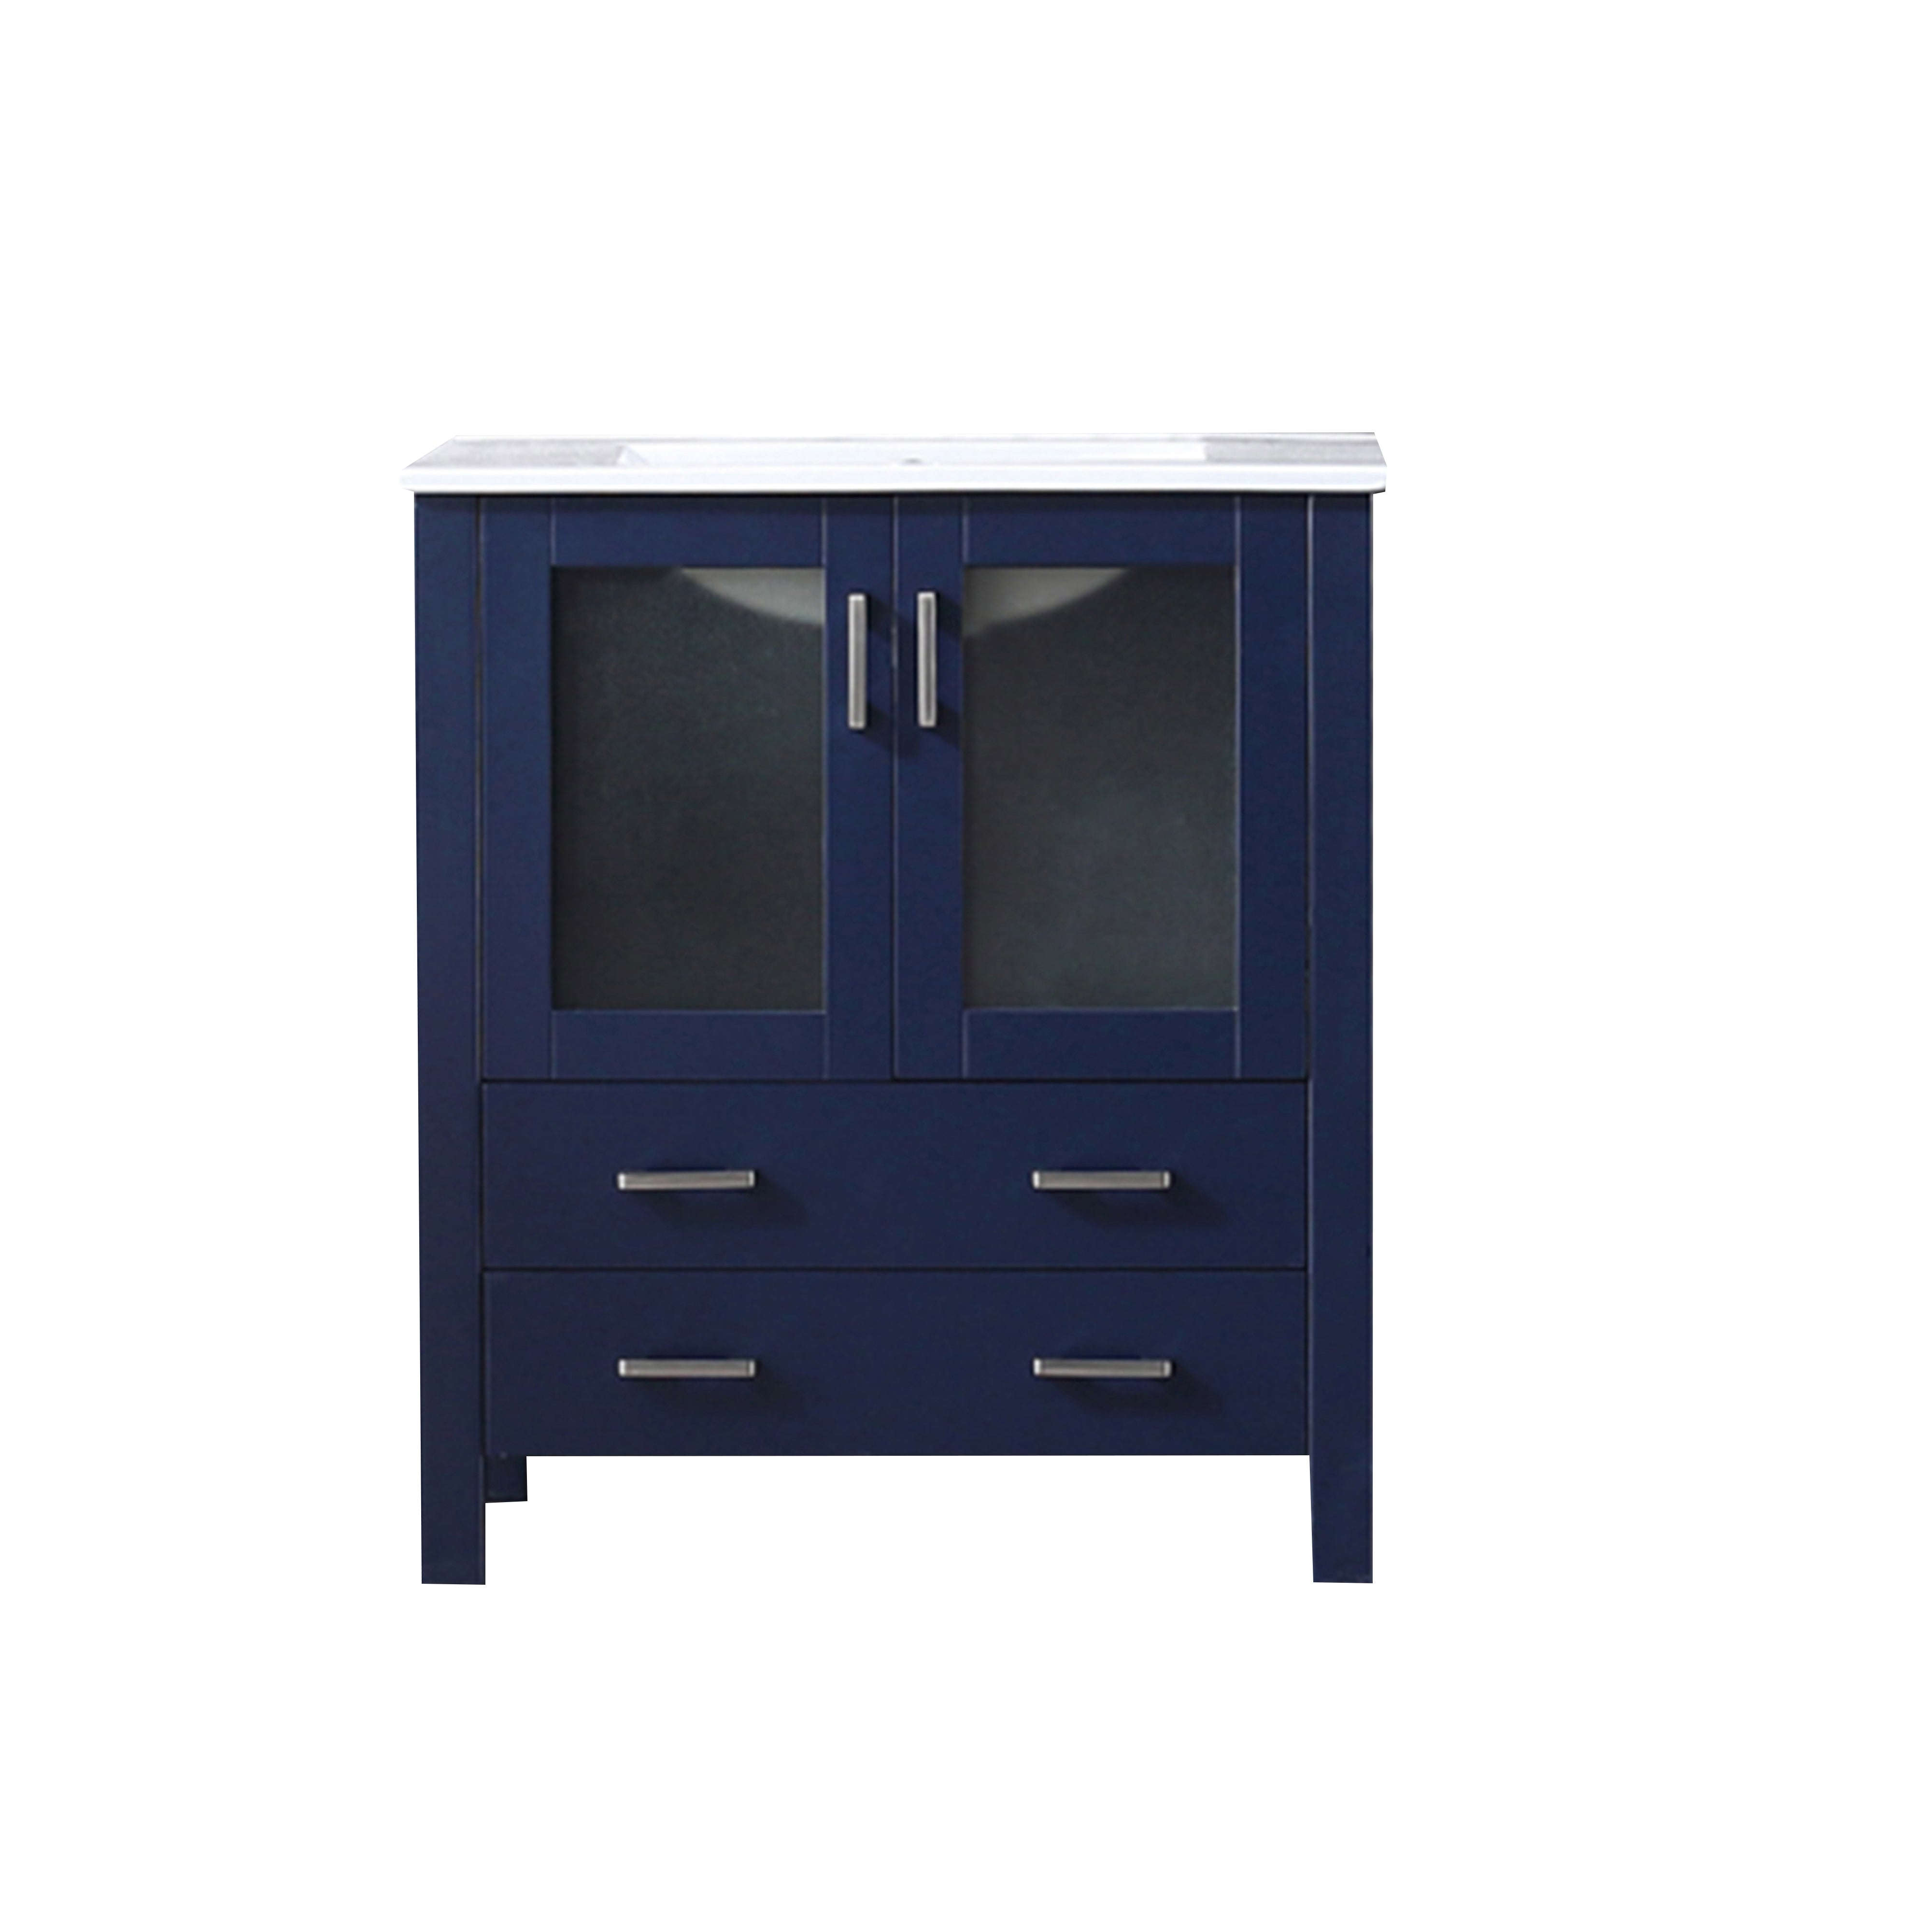 Lexora Volez LV341830SEES000 30" Single Bathroom Vanity in Navy Blue, Integrated Rectangle Sink, Front View